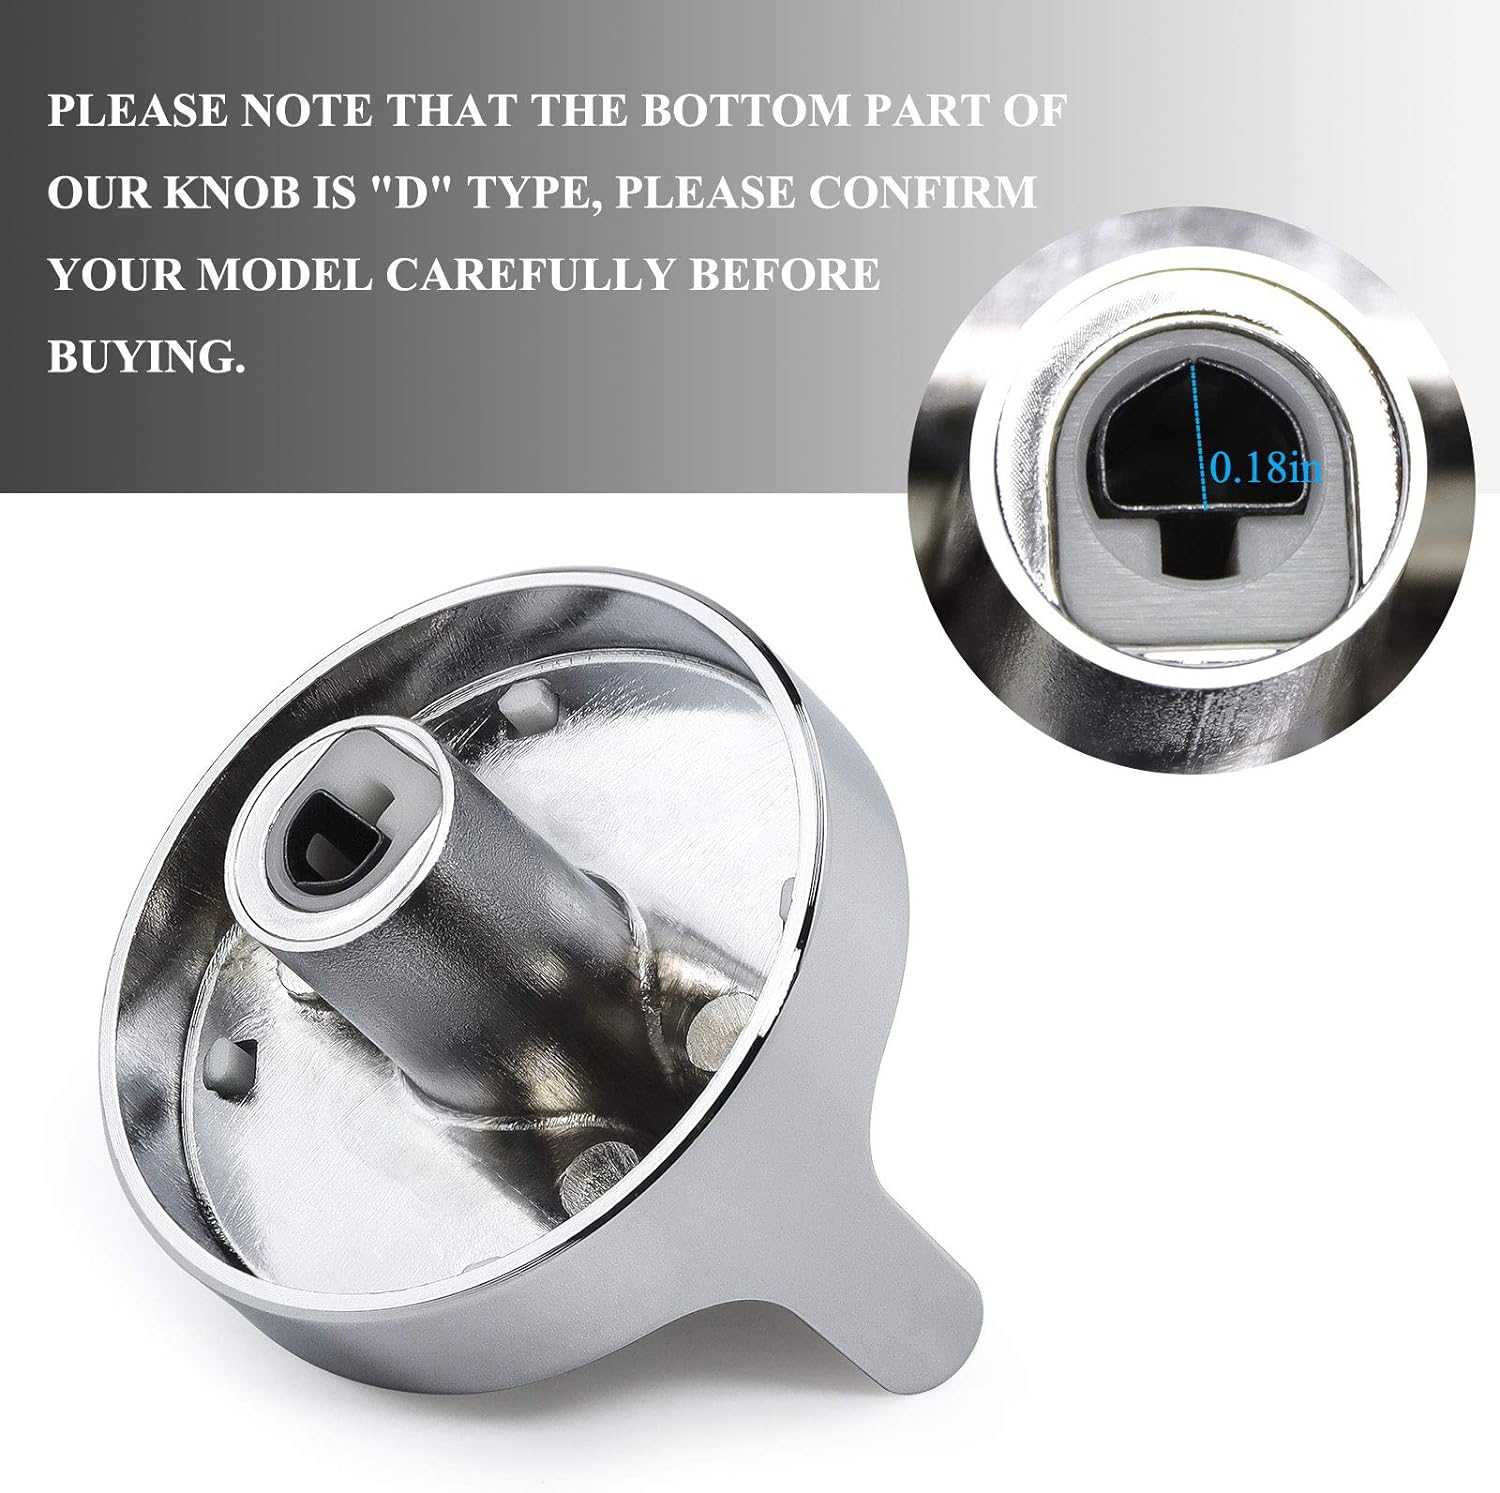 Wsh supplier W10594481 Stainless Steel Cooker Stove Control knob,Compatible  With Whirlpool Gas Cooktop Range/Oven(CAV1),Replaces Part# WPW10